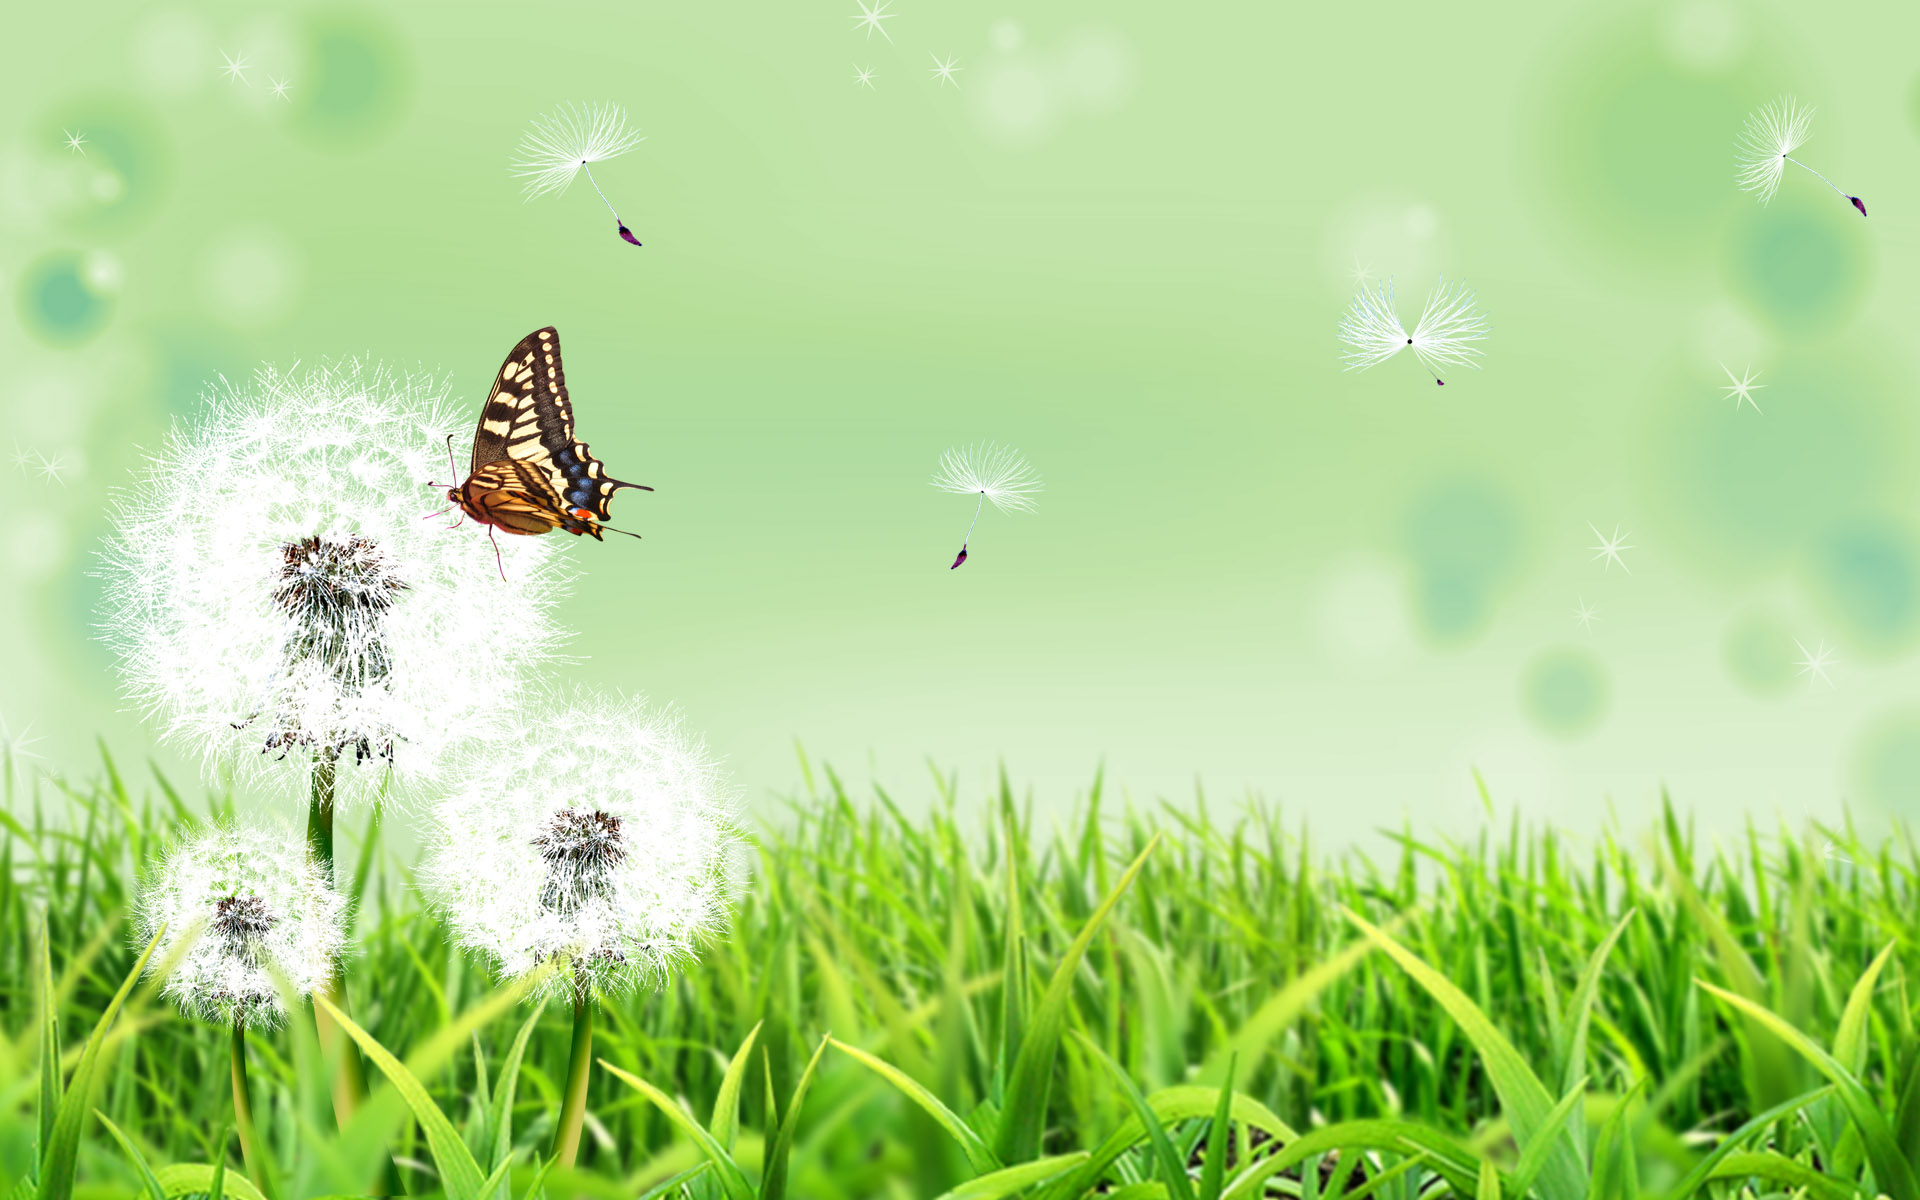 Wallpaper Of Natural Scenery A Brown Butterfly Flying In The